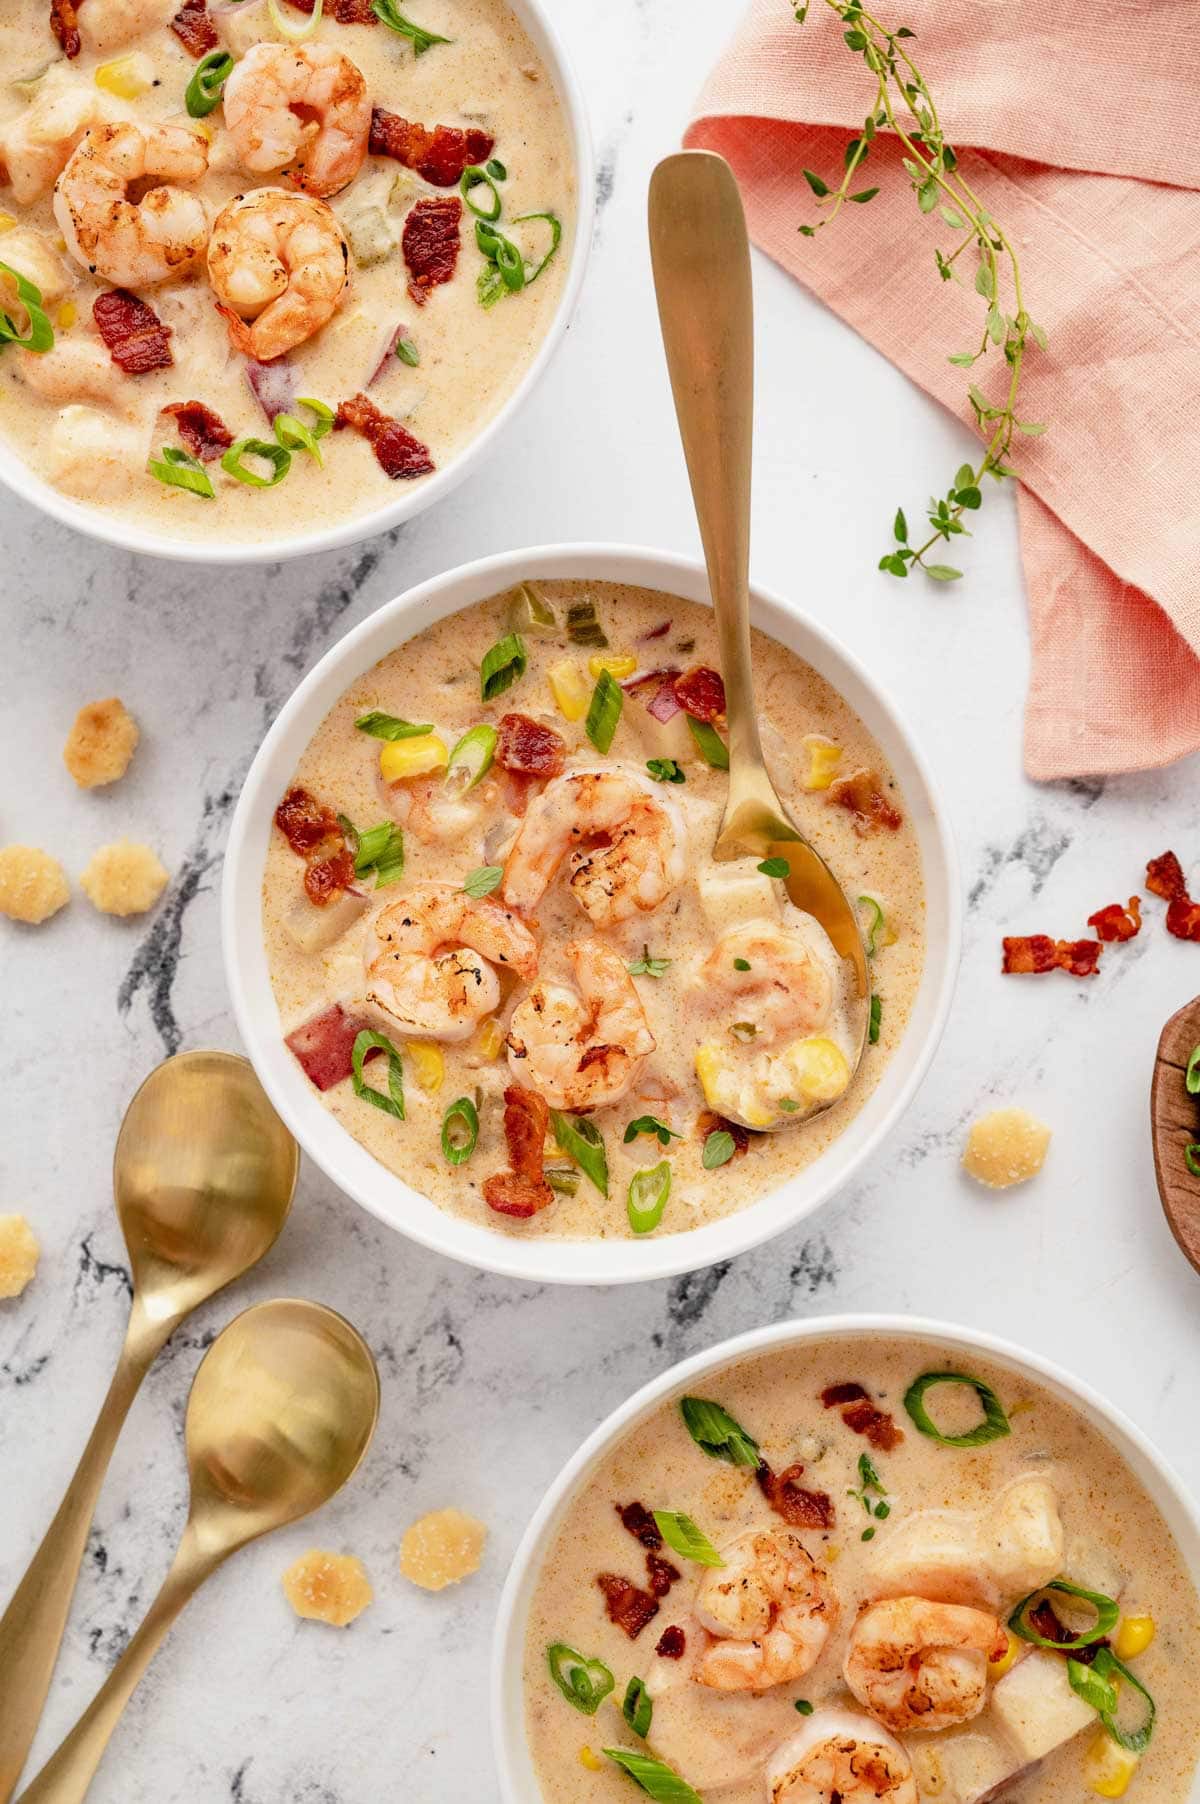 Shrimp corn chowder in a white bowl with a spoon.